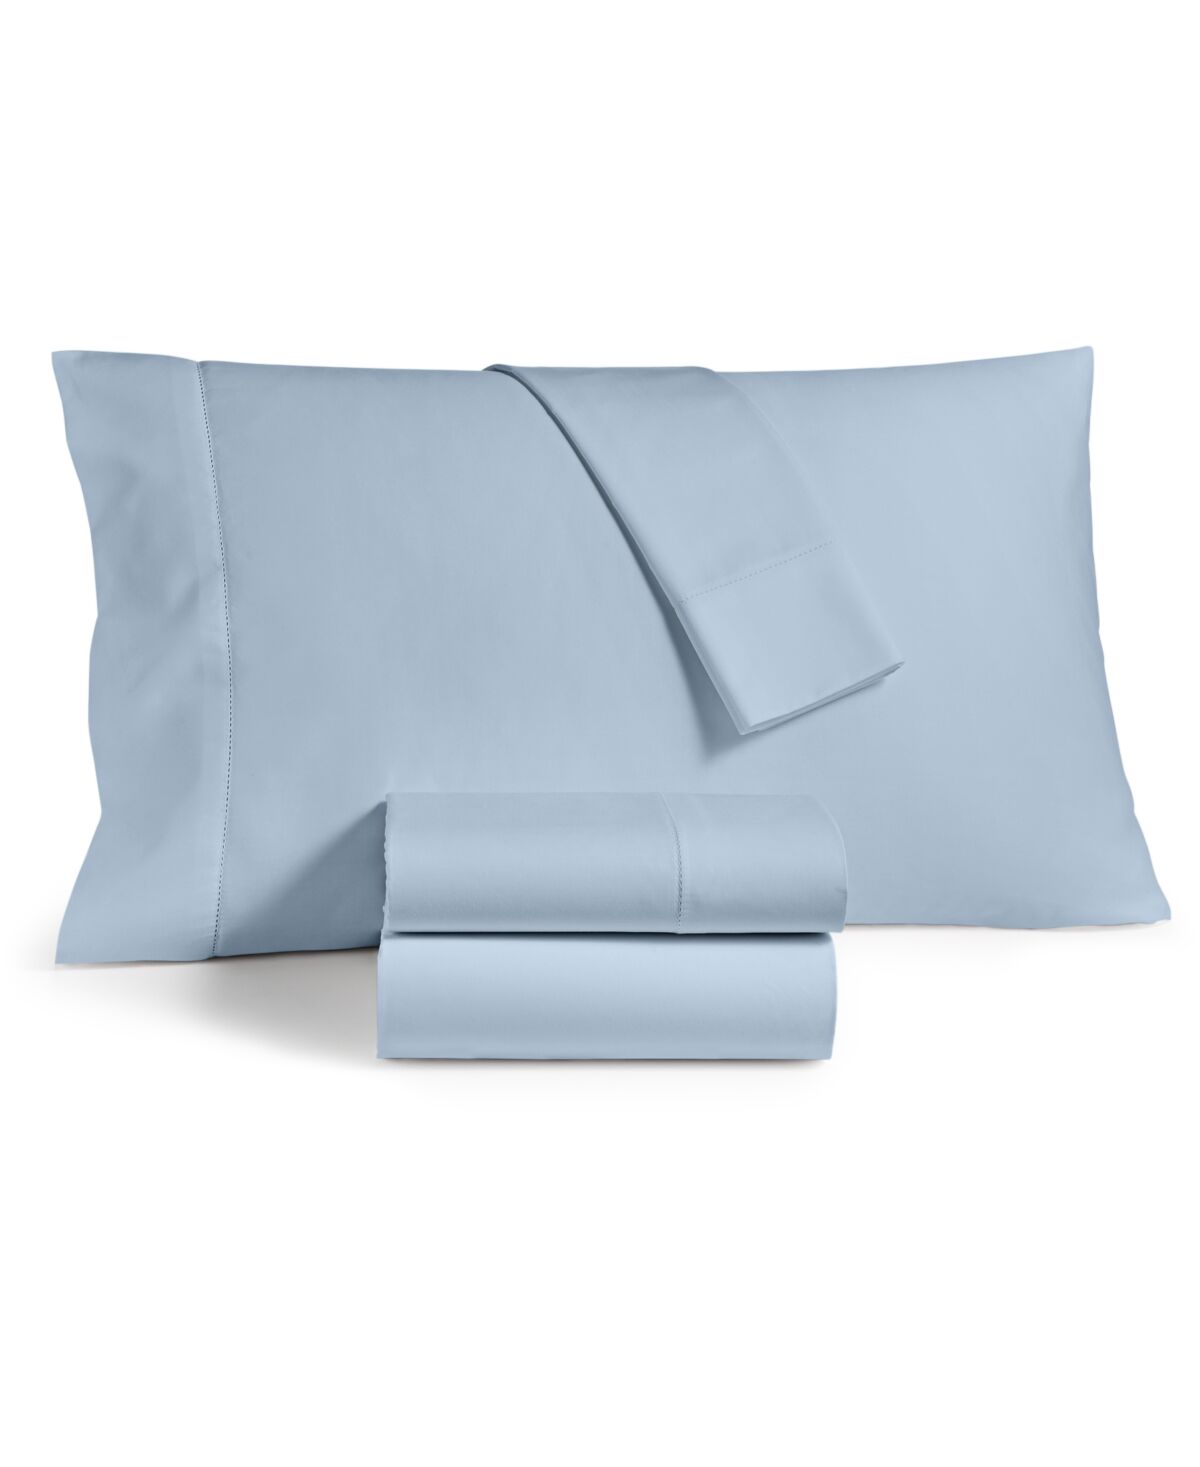 Hotel Collection 680 Thread Count 100% Supima Cotton Sheet Set, Queen, Created for Macy's - Sky